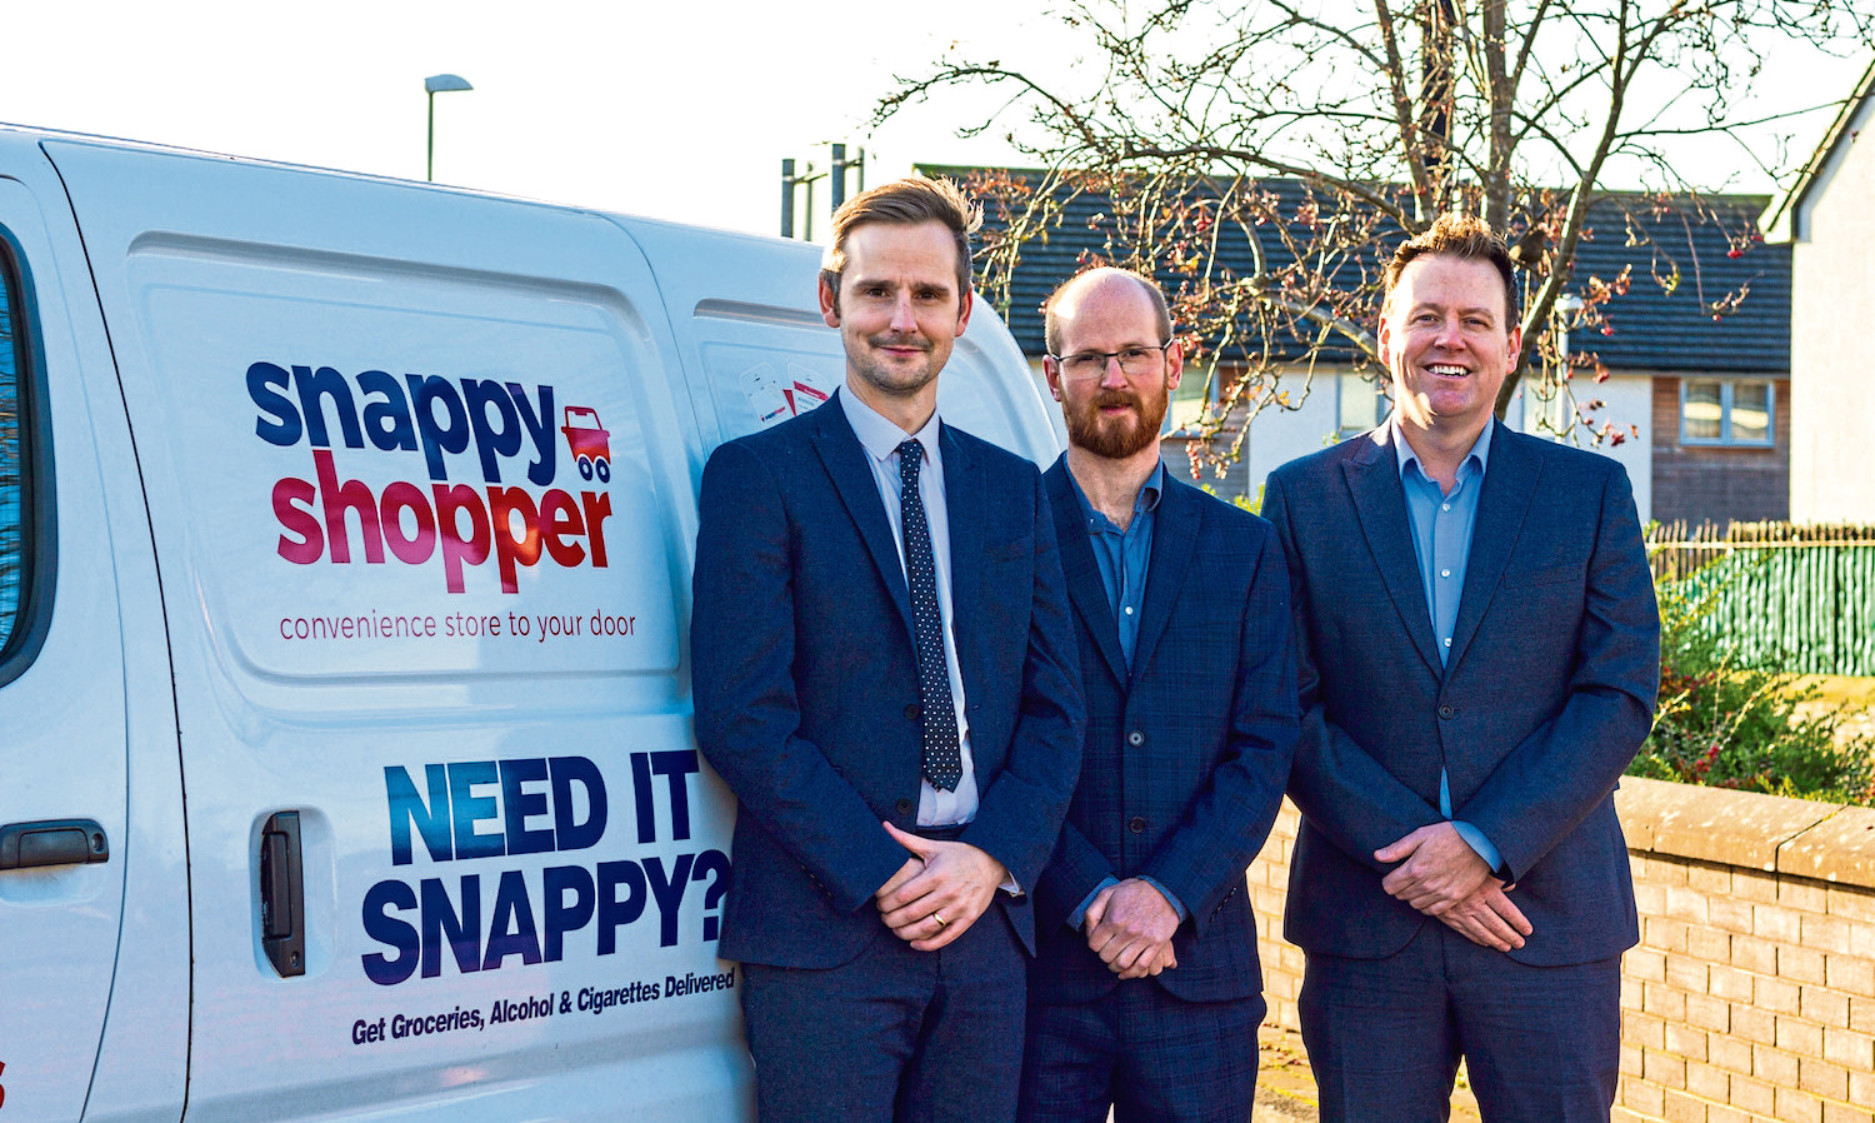 Snappy Shopper co-founder and chair Mike Callachan, with chief technical officer Alan Reid and Mark Steven.